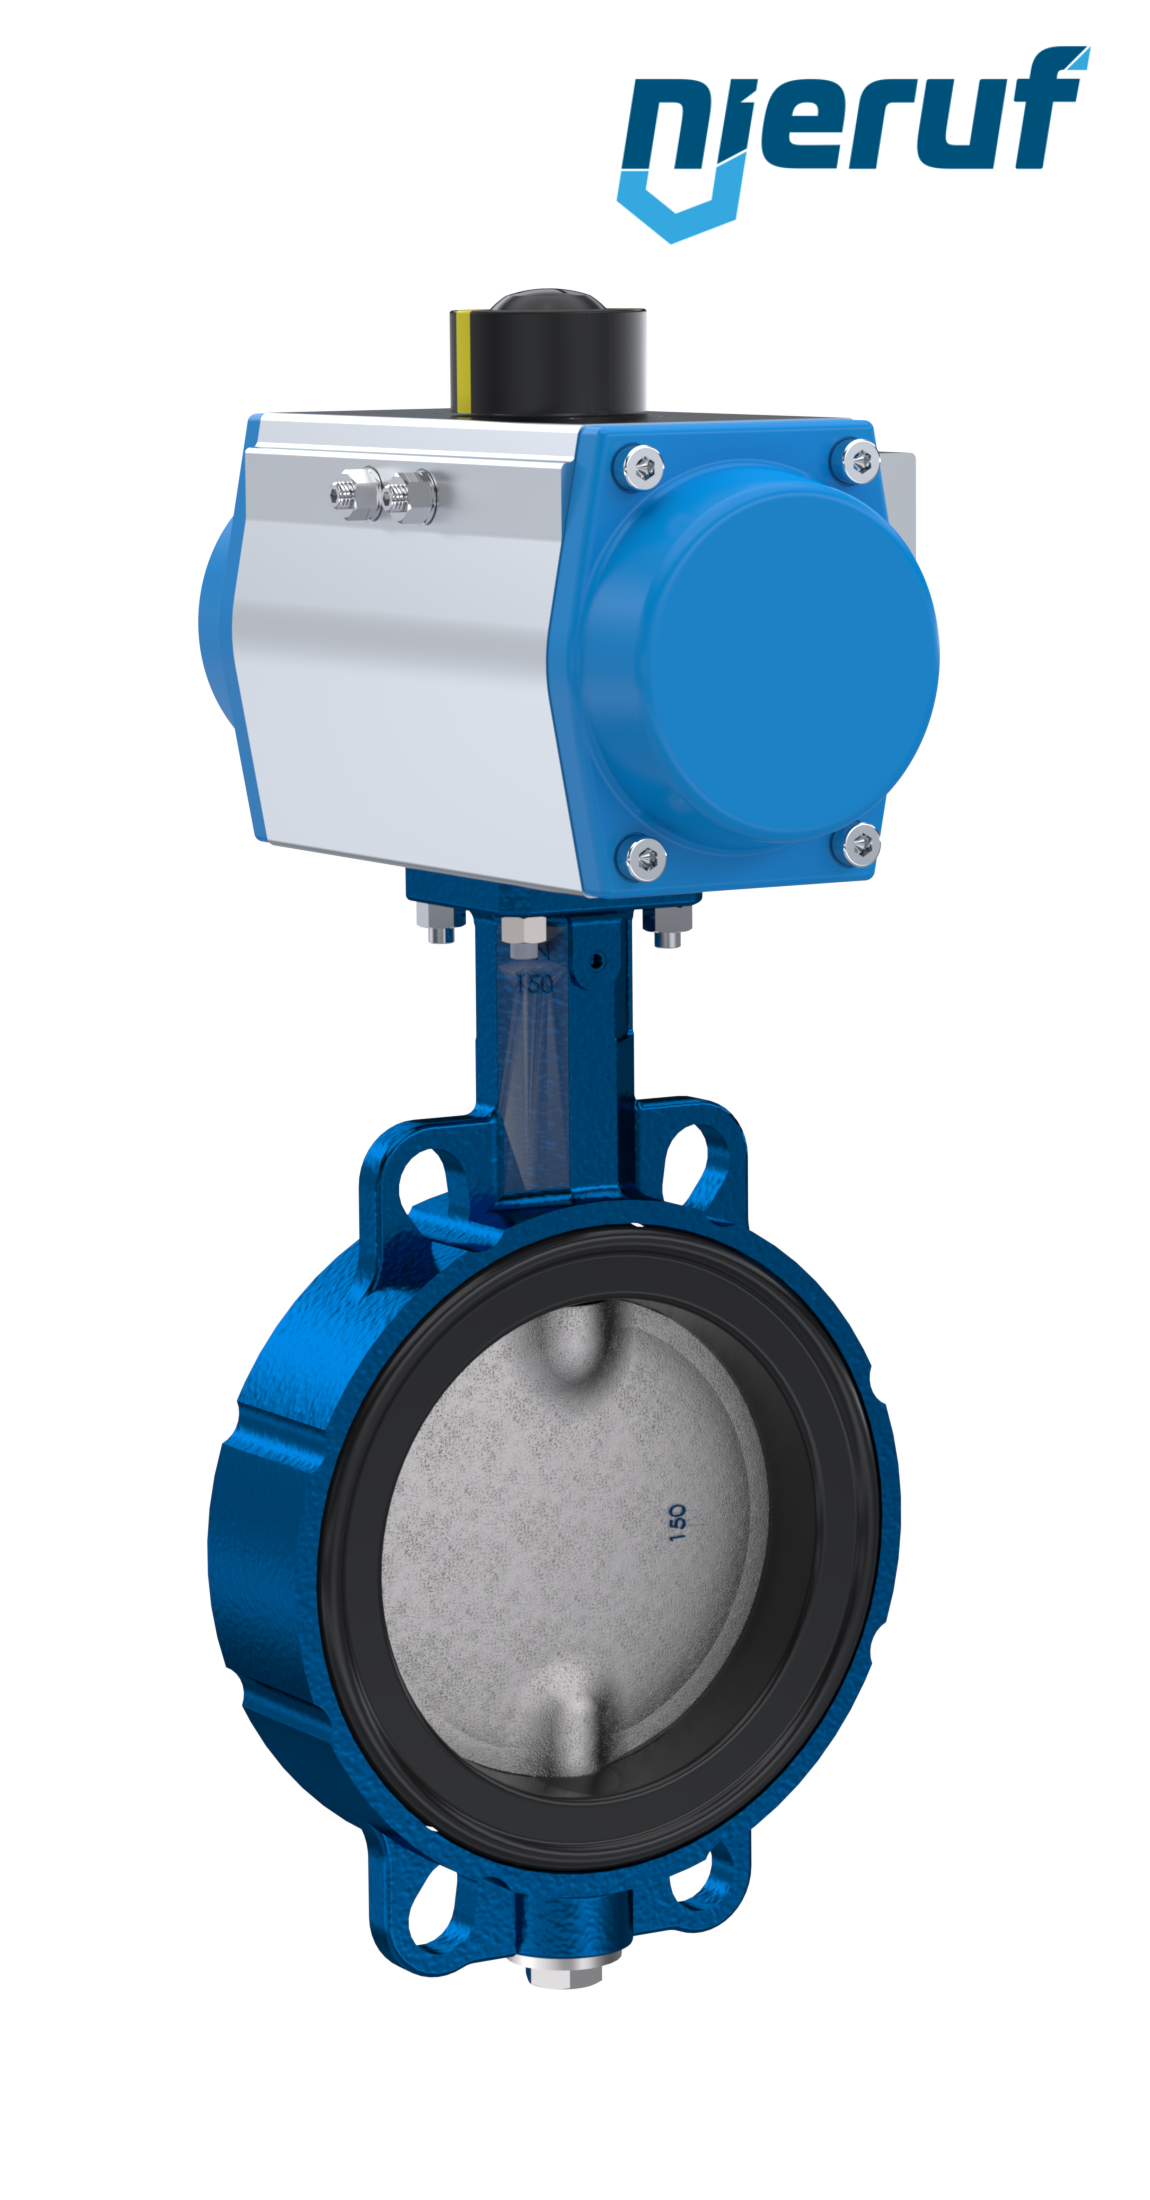 Butterfly valve DN 100 AK01 EPDM DVGW drinking water, WRAS, ACS, W270 pneumatic actuator double acting